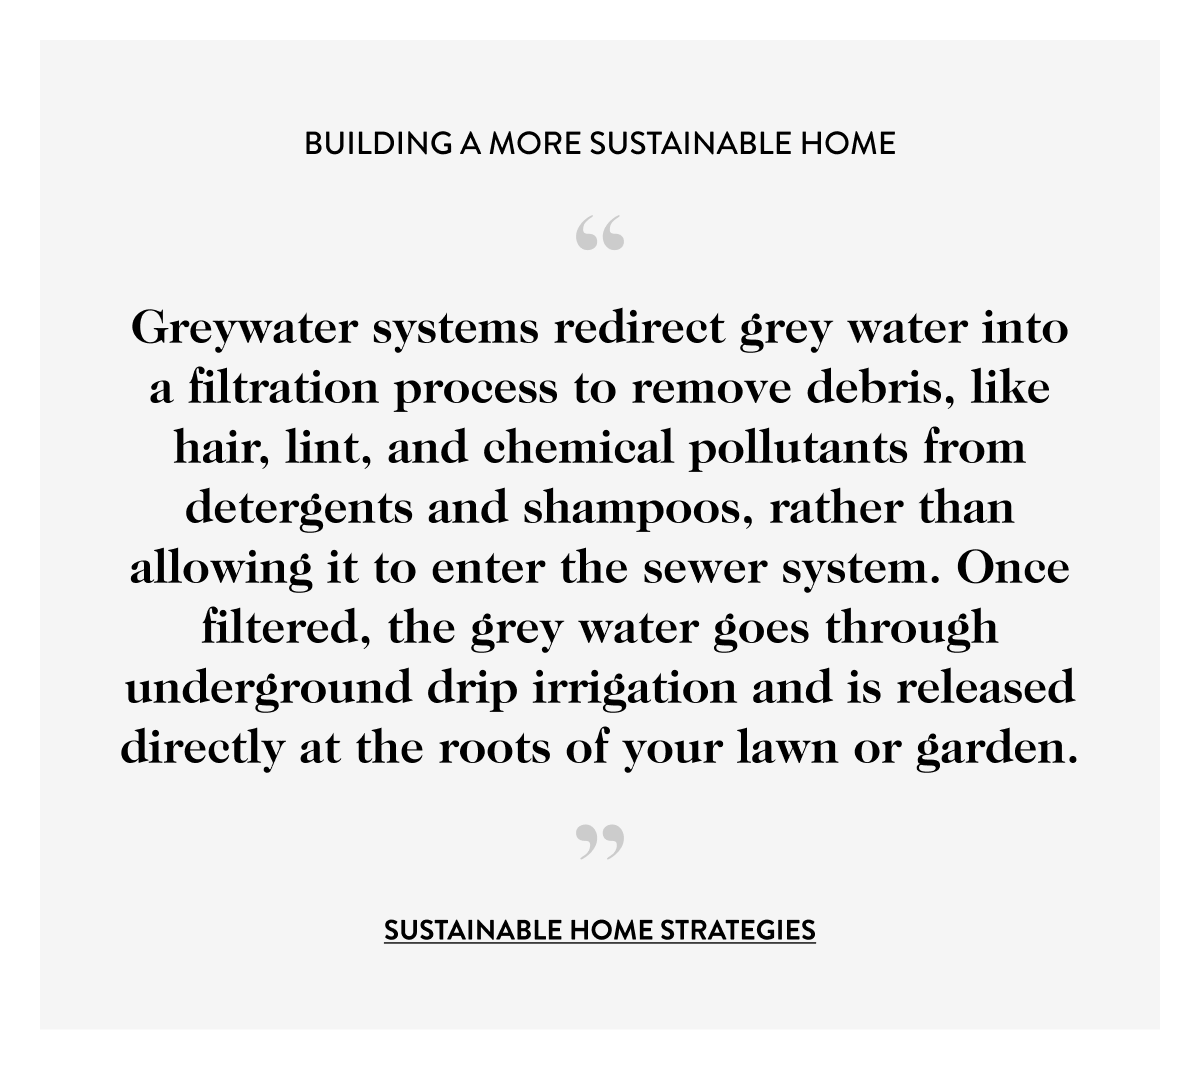 Greywater systems redirect grey water into a filtration process to remove debris, like hair, lint, and chemical pollutants from detergents and shampoos, rather than allowing it to enter the sewer system. Once filtered, the grey water goes through underground drip irrigation and is released directly at the roots of your lawn or garden.